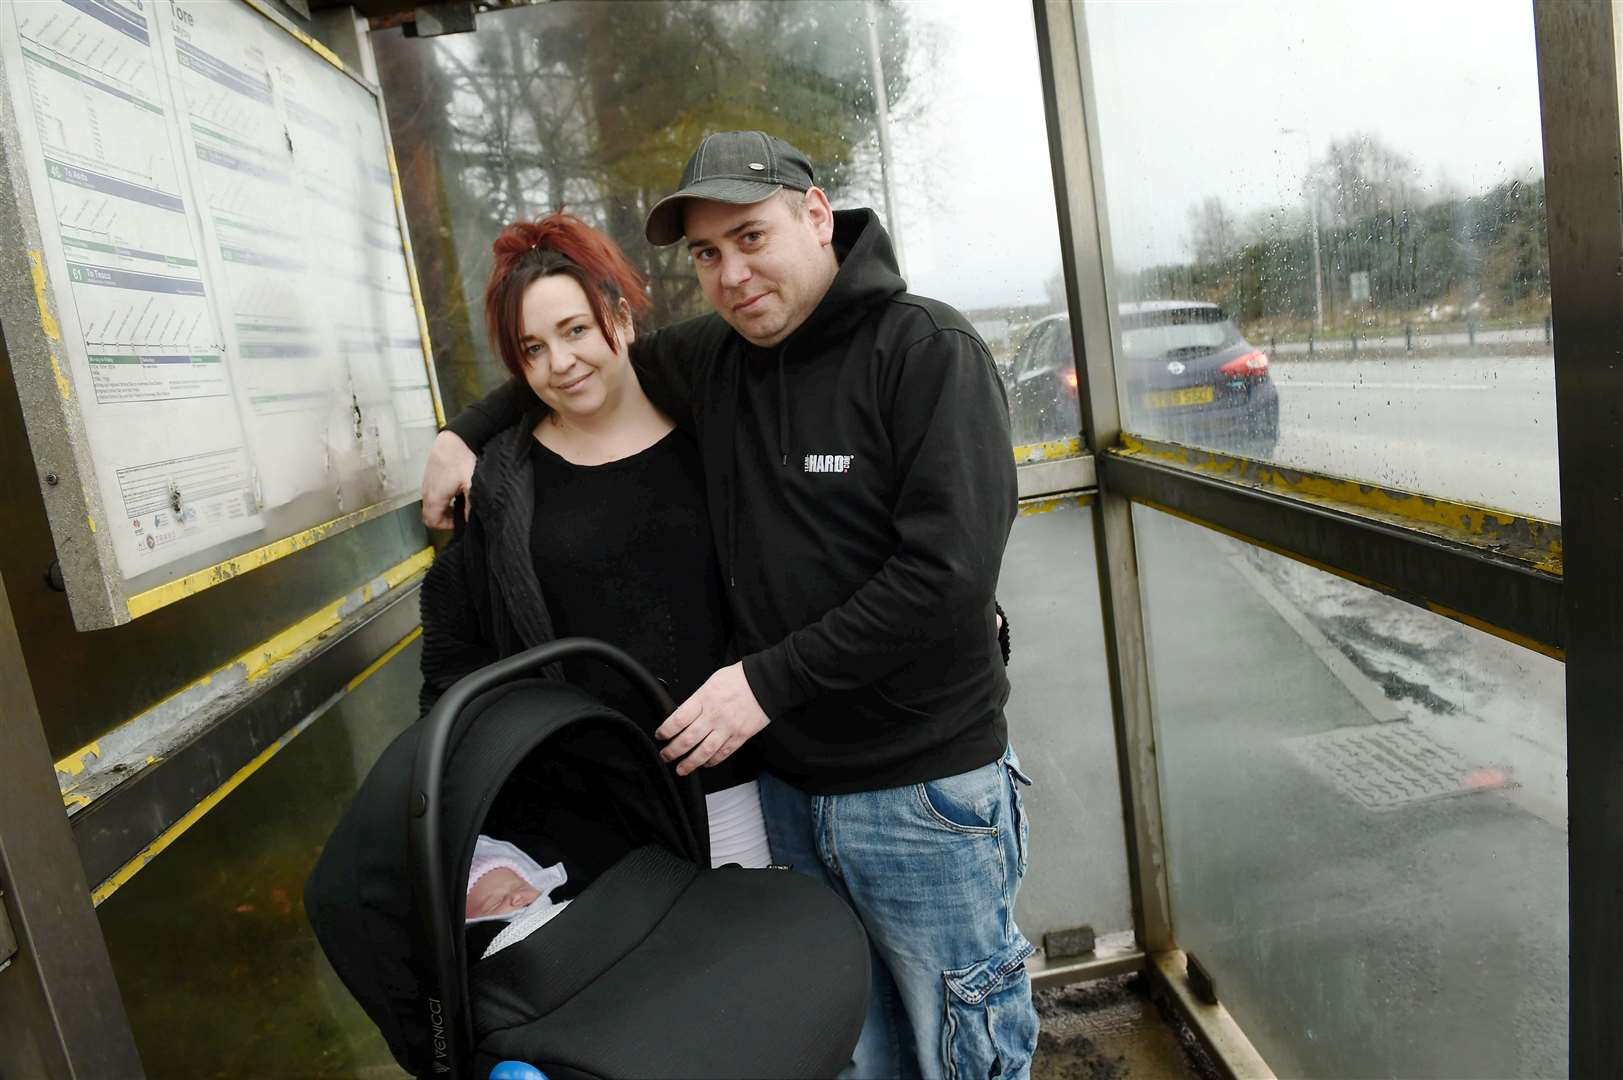 Amanda Jolly and Andy MacKay with their daughter Faith MacKay who was born at the southbound bus stop on the A9 near the Tore roundabout.